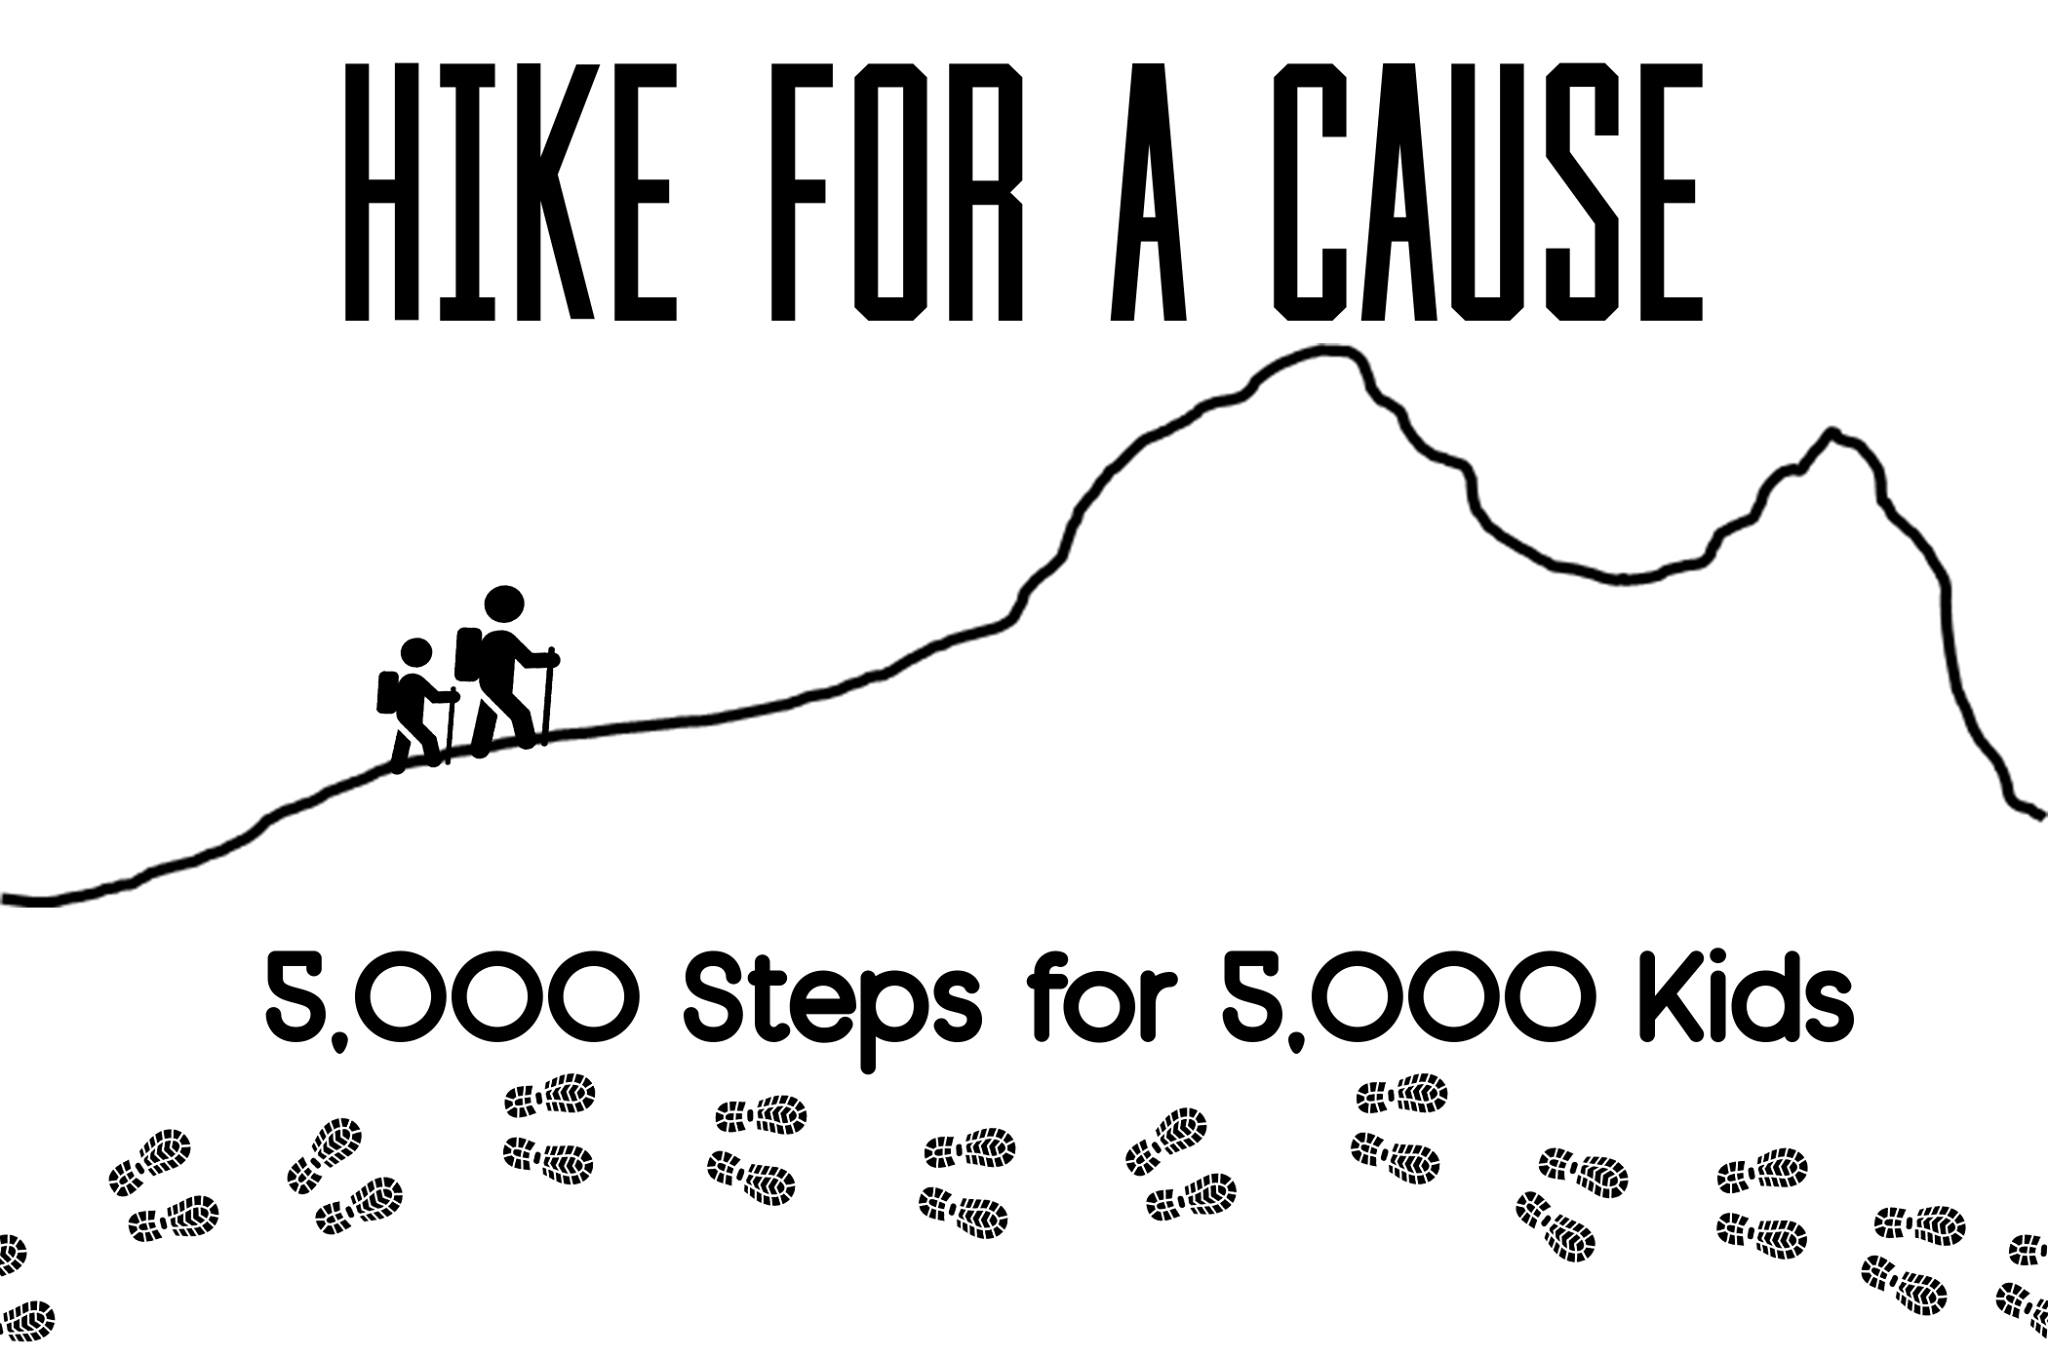 <h1 class="tribe-events-single-event-title">Hike for a Cause: 5,000 Steps for 5,000 Kids</h1>